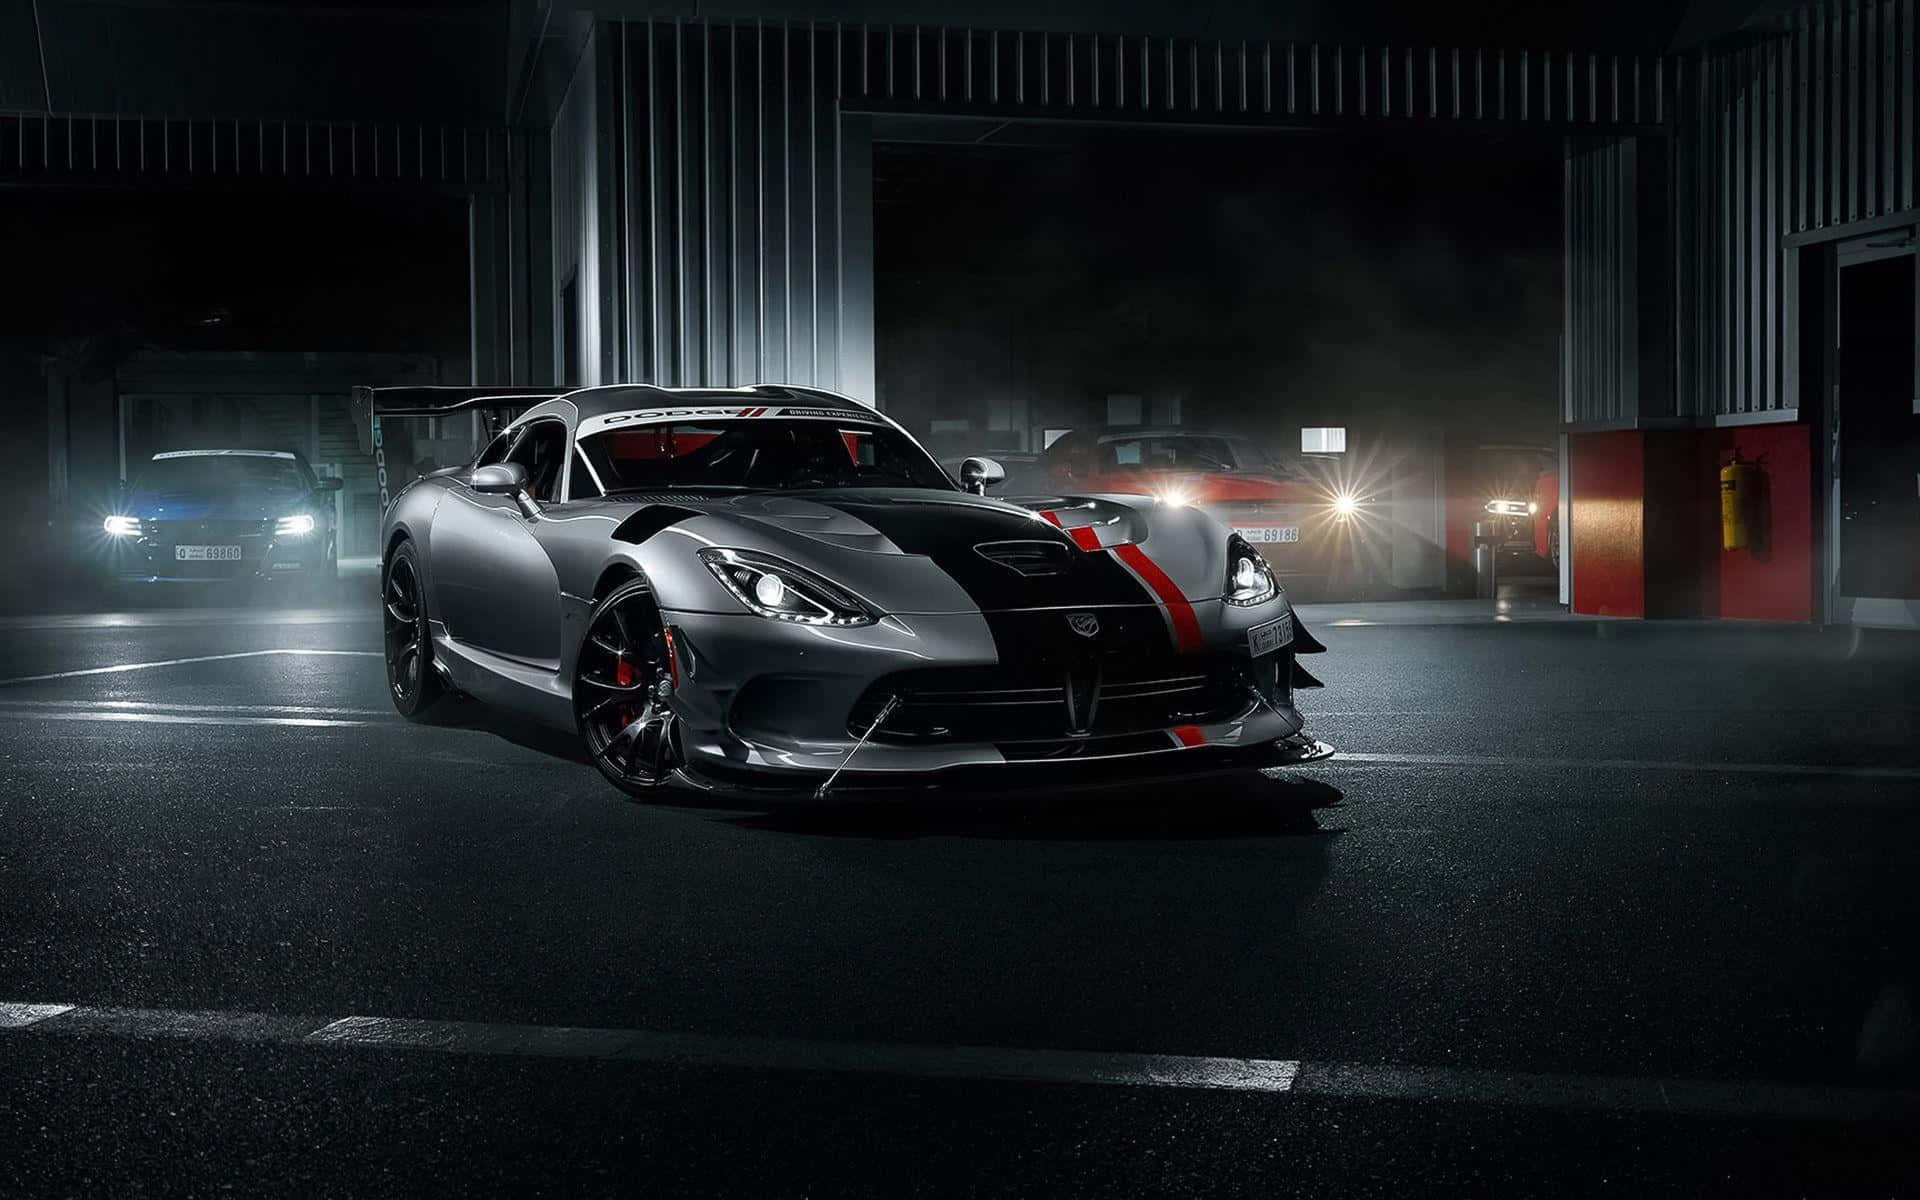 Enjoy the thrill of beastly power with the Dodge Viper Wallpaper